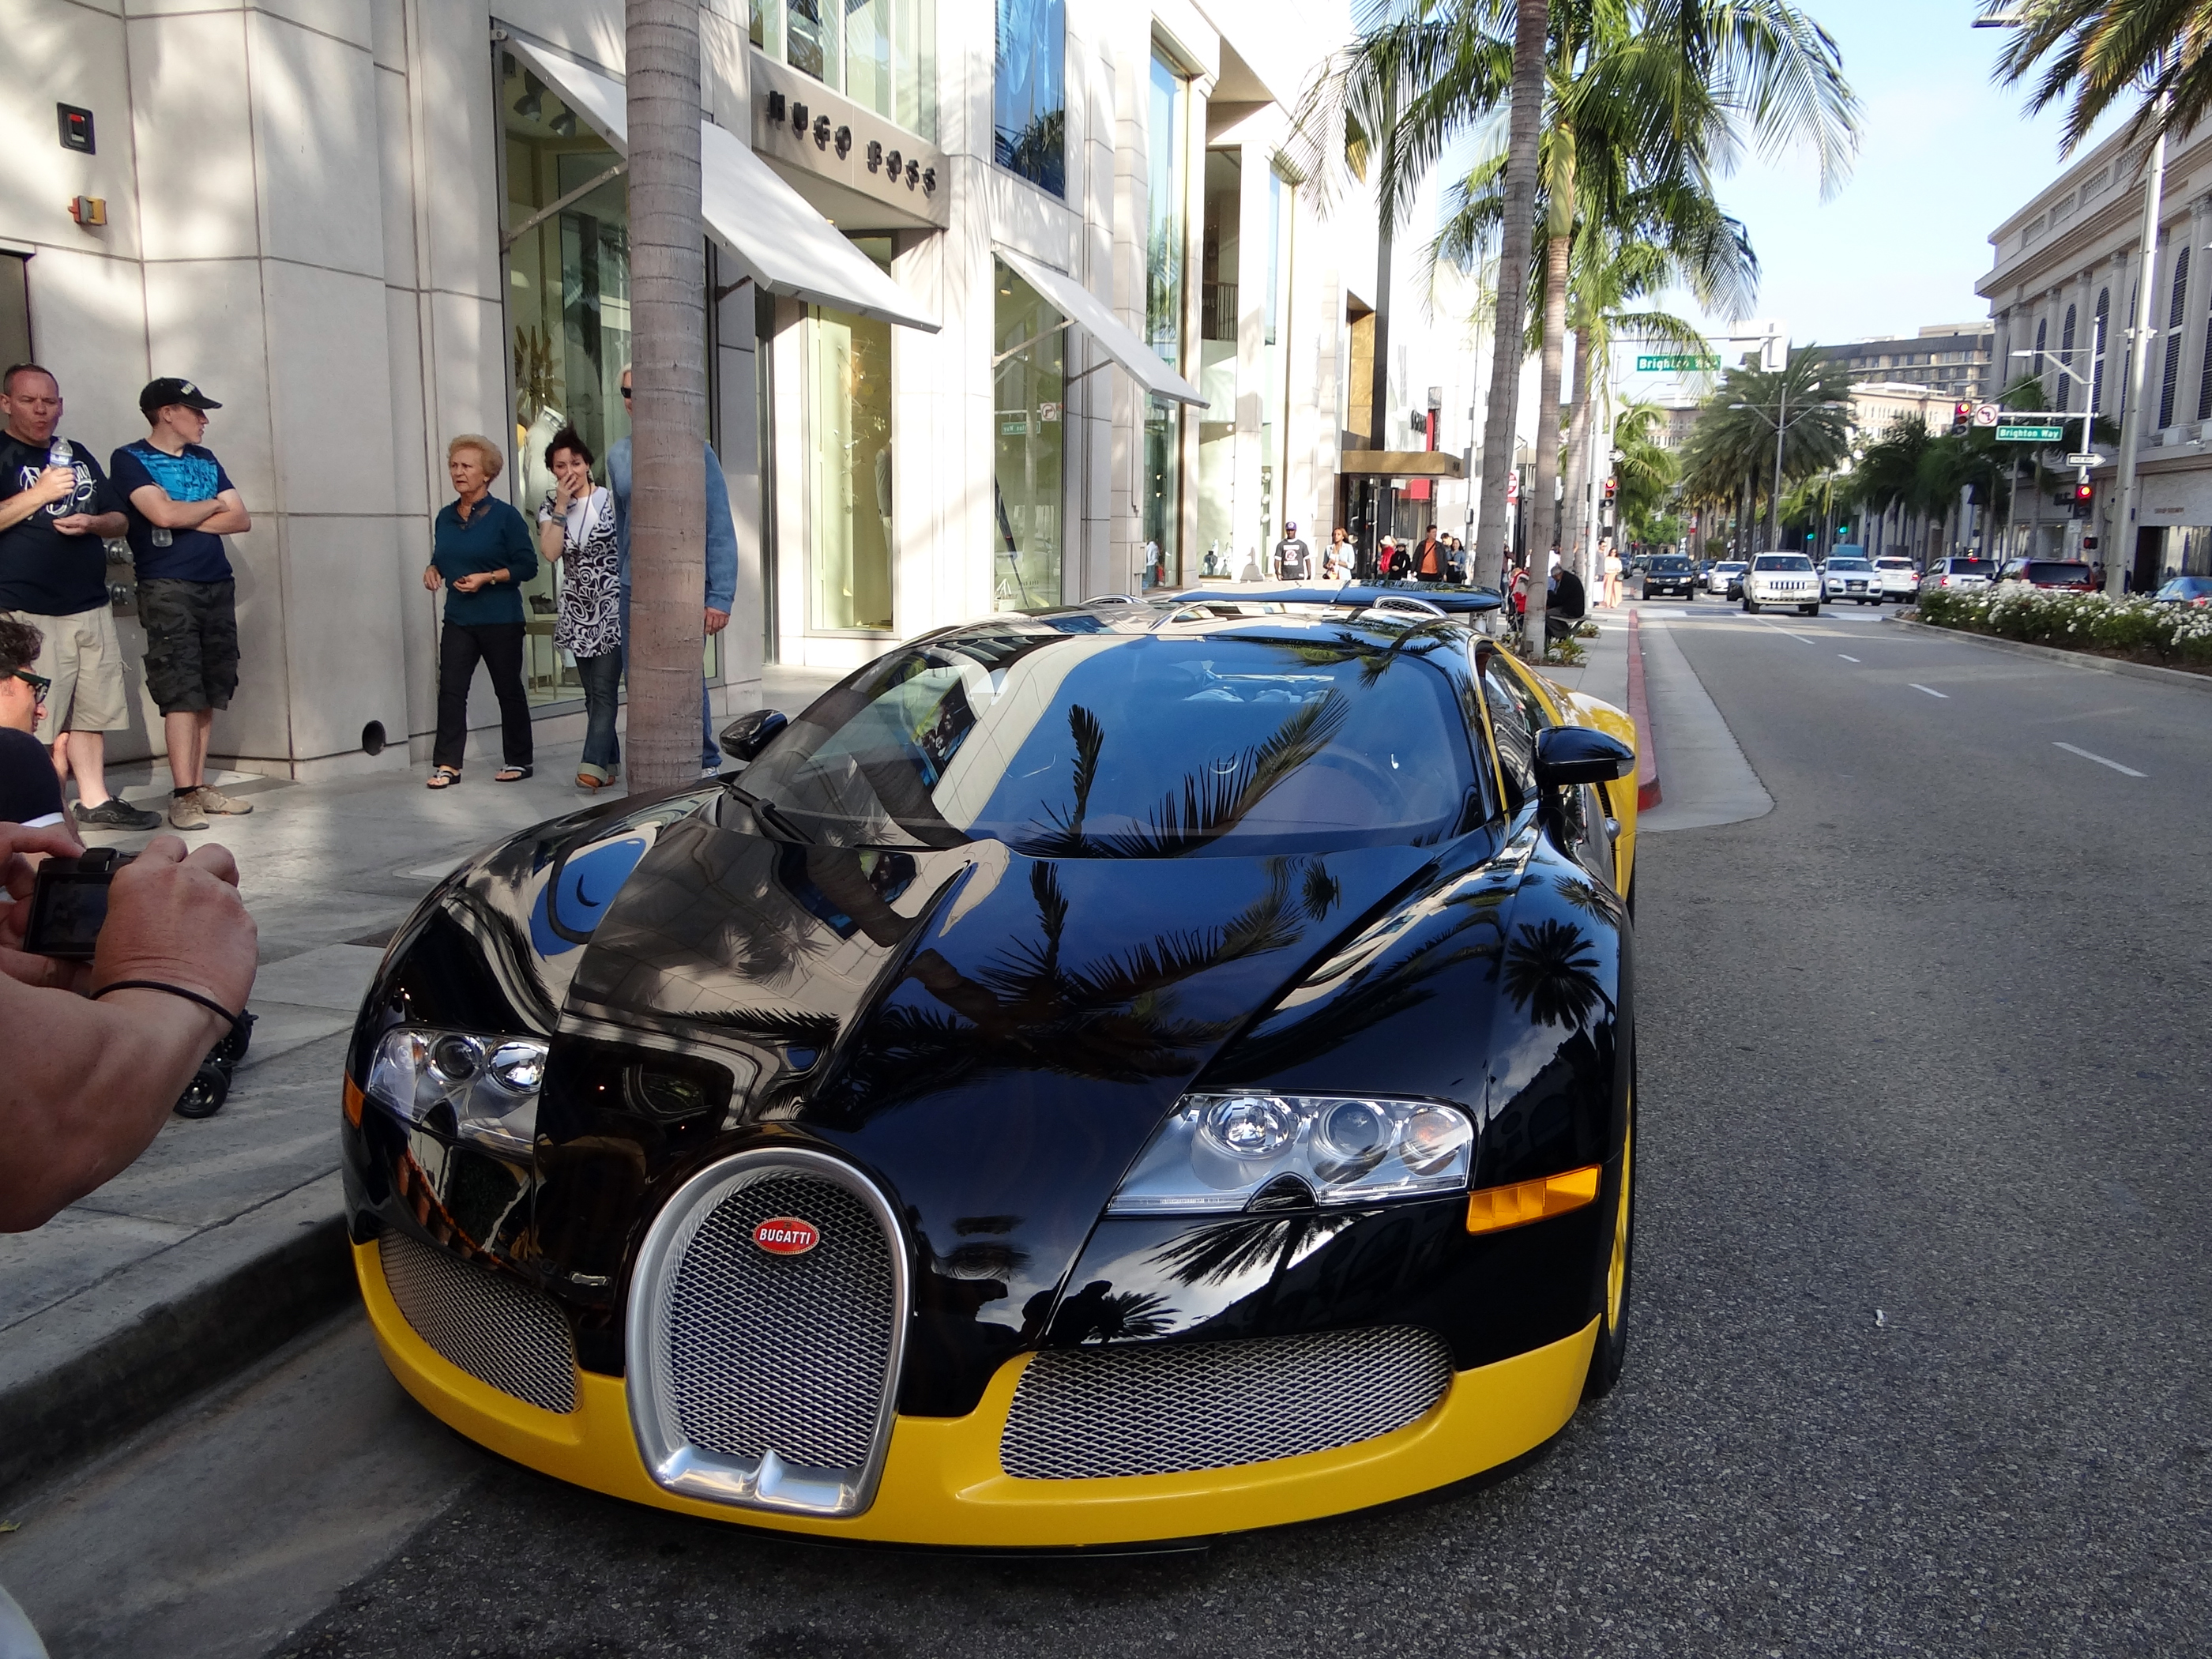  beverly hills rodeo drive  HD Photo Wallpaper Collection HD WALLPAPERS